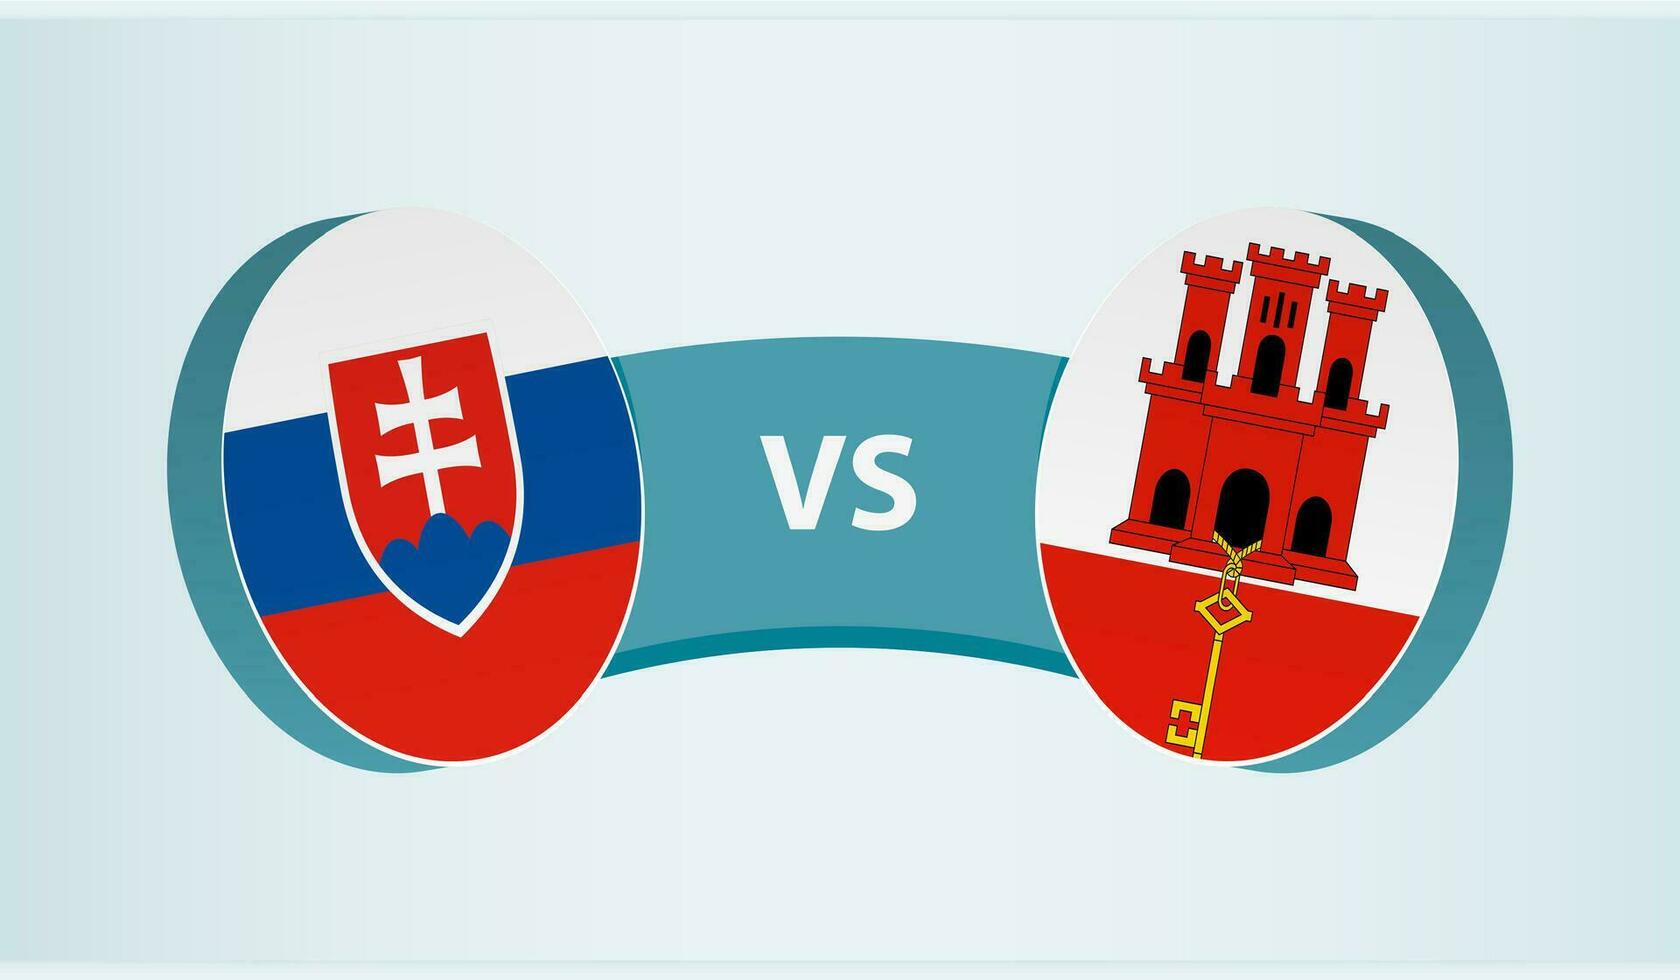 Slovakia versus Gibraltar, team sports competition concept. vector